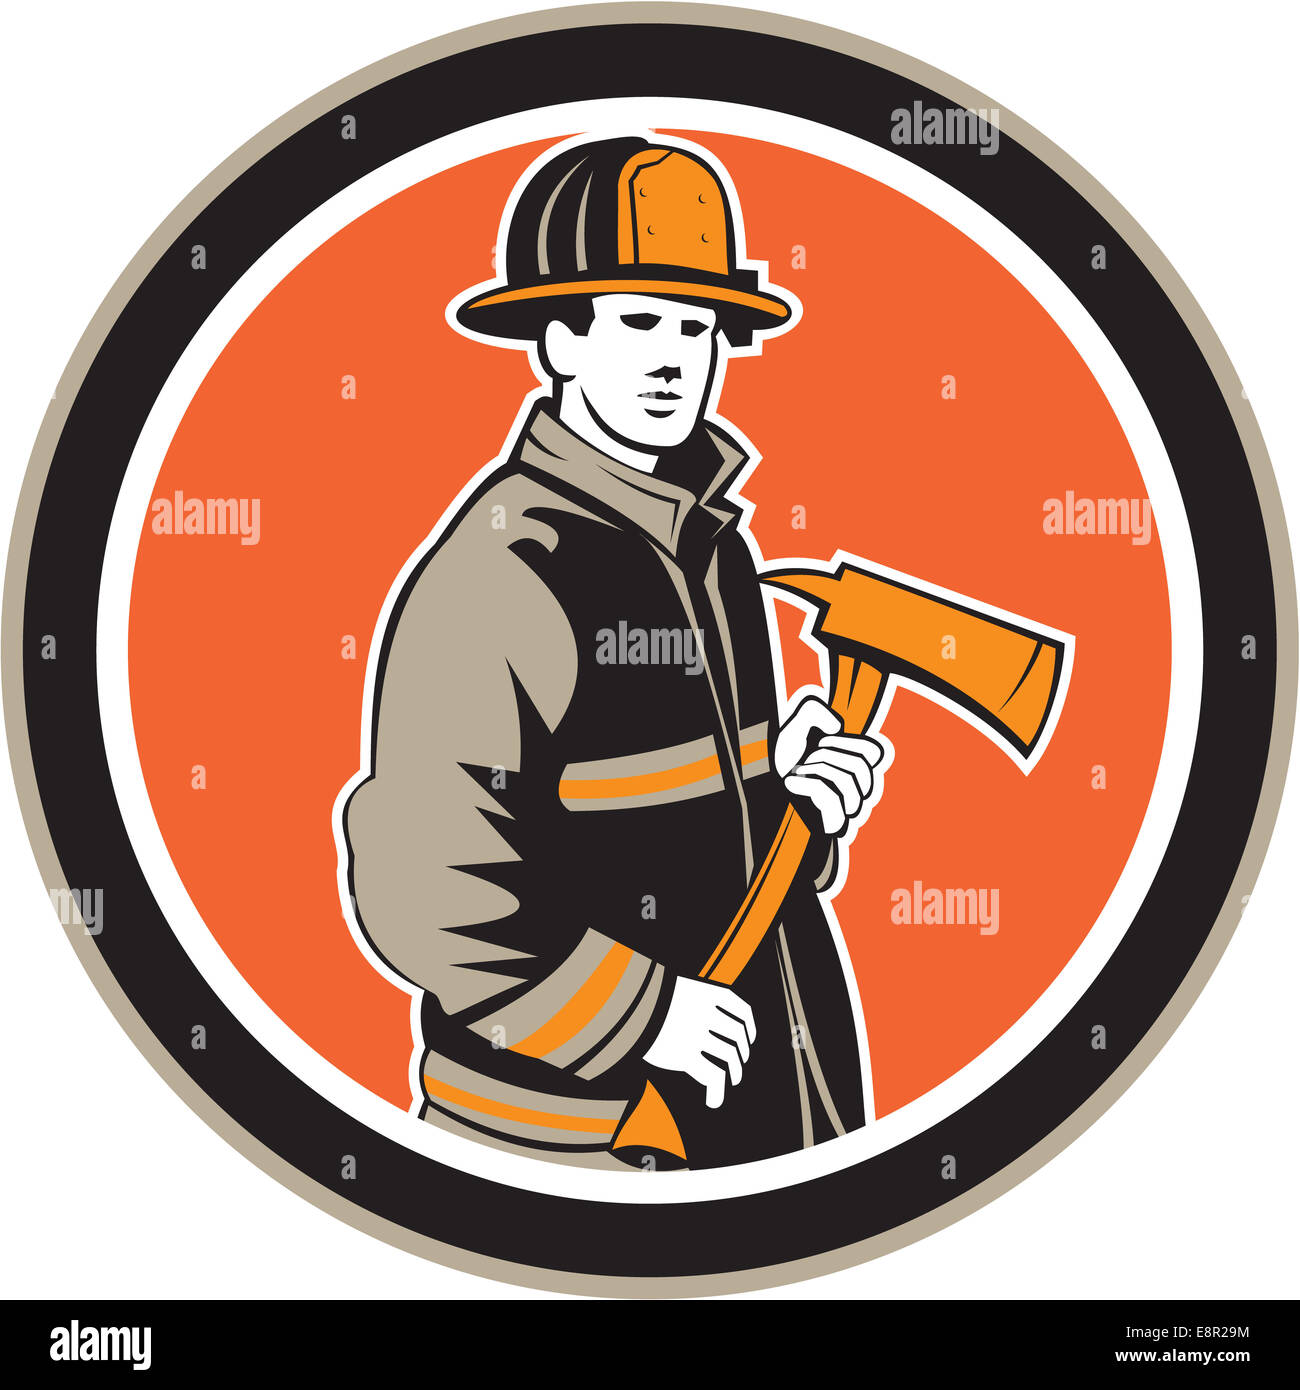 Illustration of a fireman fire fighter emergency worker holding a fire axe viewed from front set inside circle on isolated background done in retro style. Stock Photo